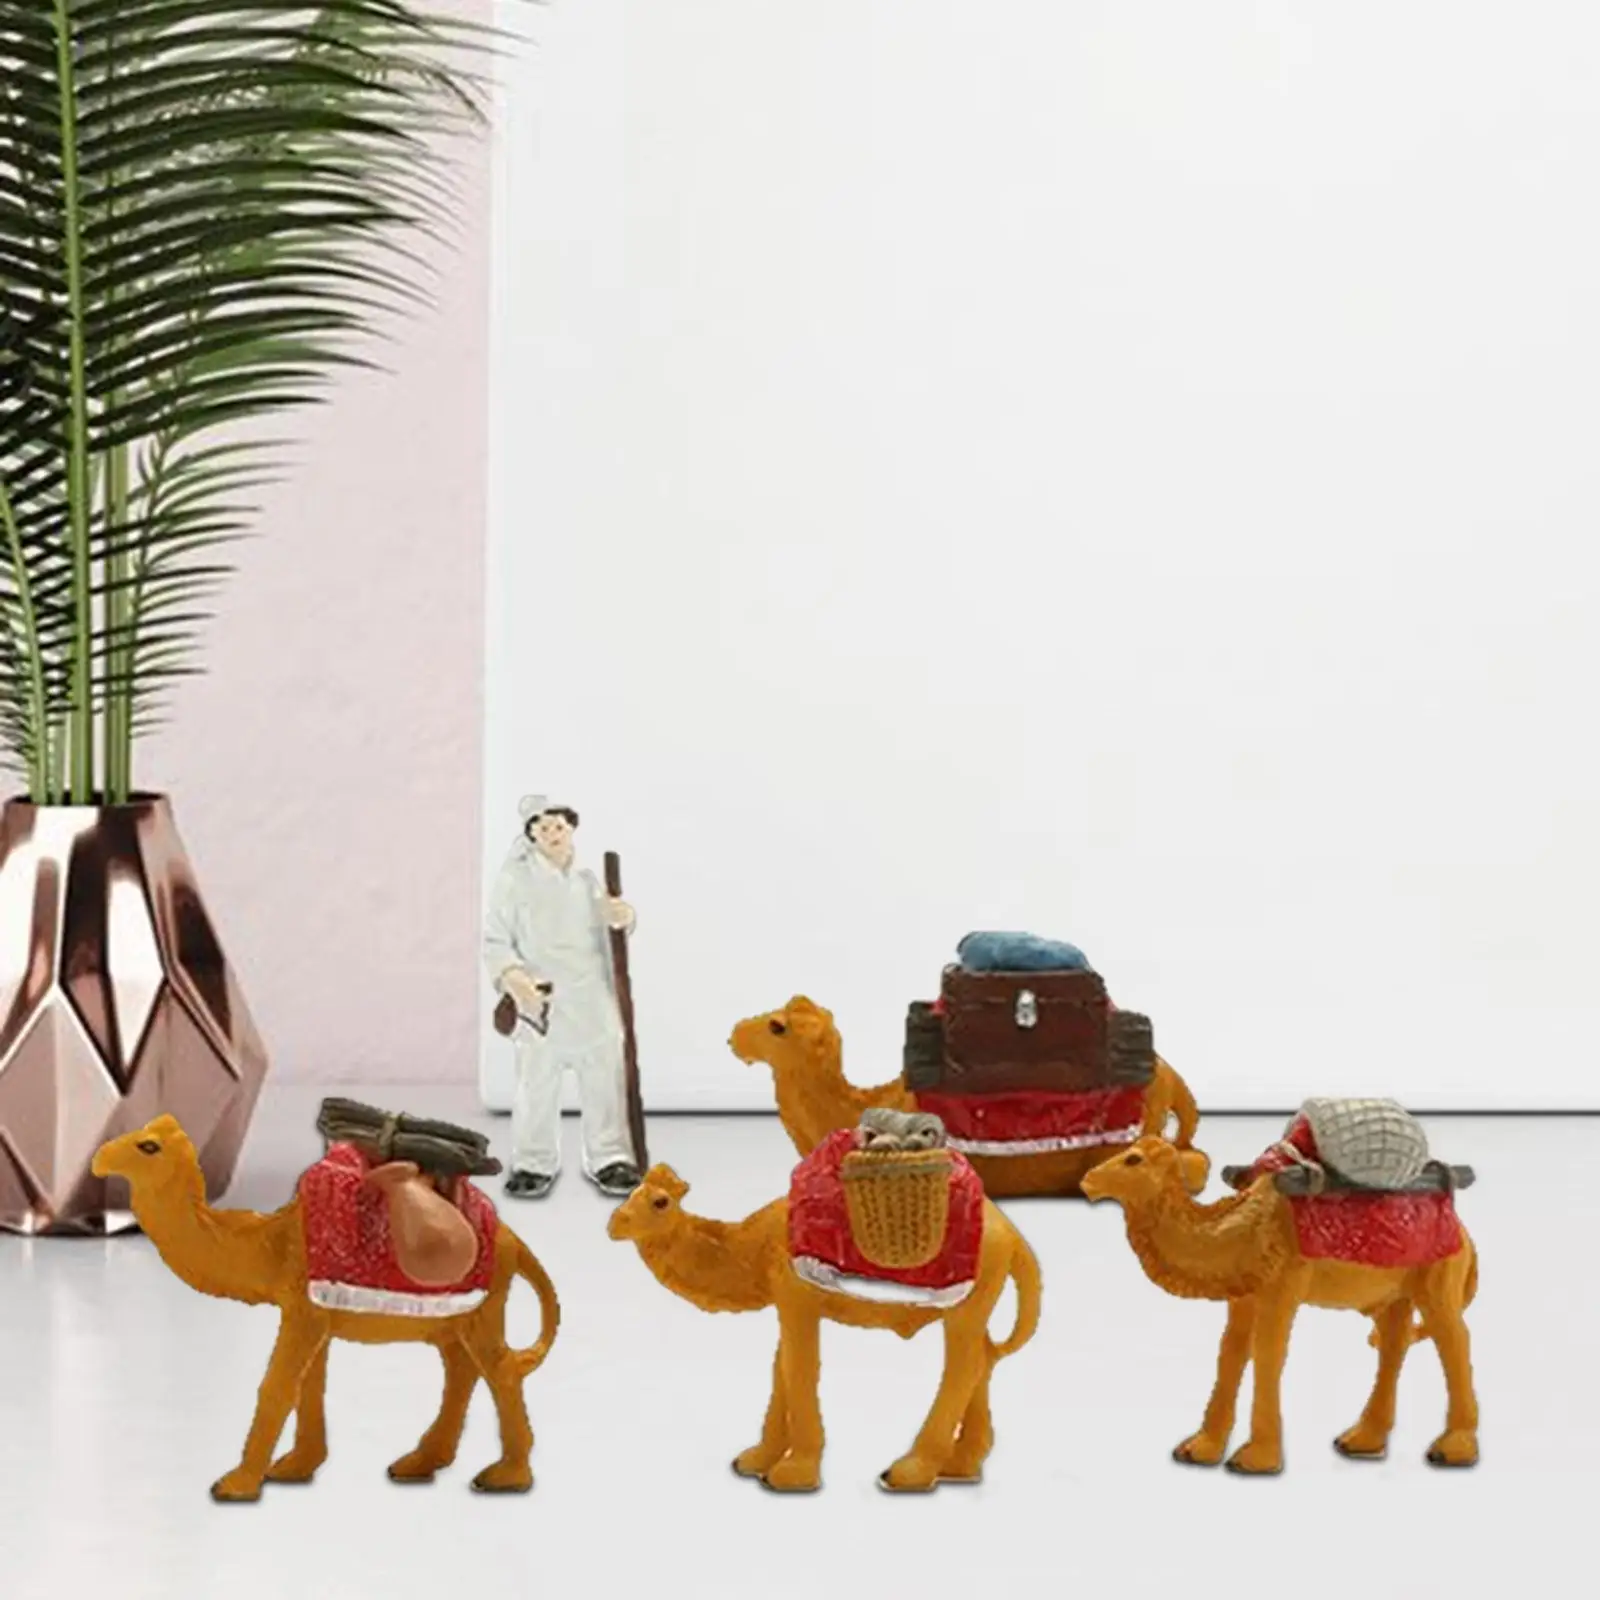 

5x Cute Miniature Animal Desert Model Cake Toppers Statues Educational Learning Toys Ornaments Resin Camel Figurines Home Decor